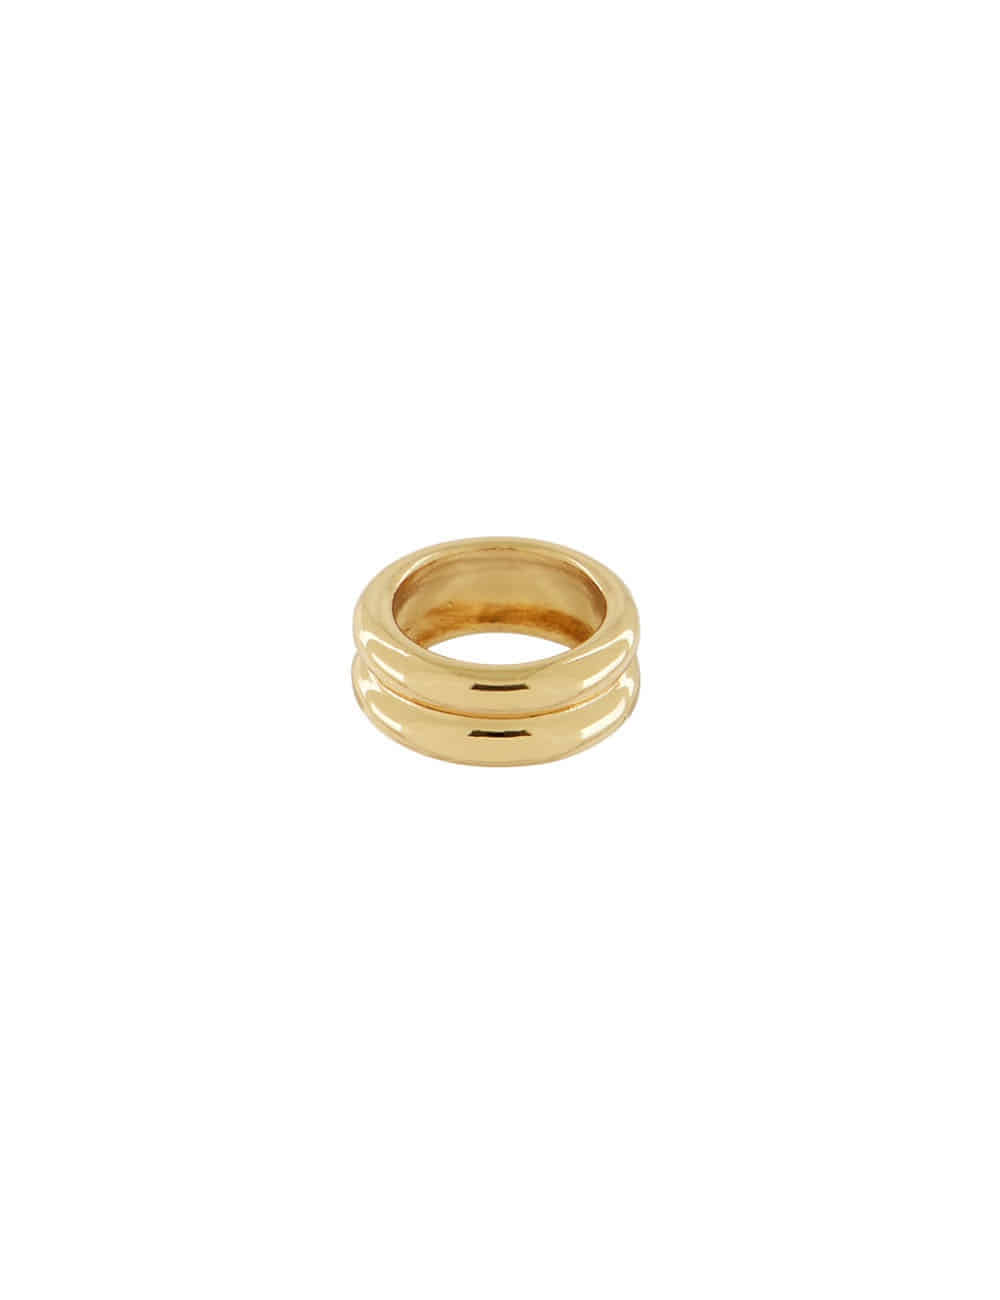 Iconic duet ring